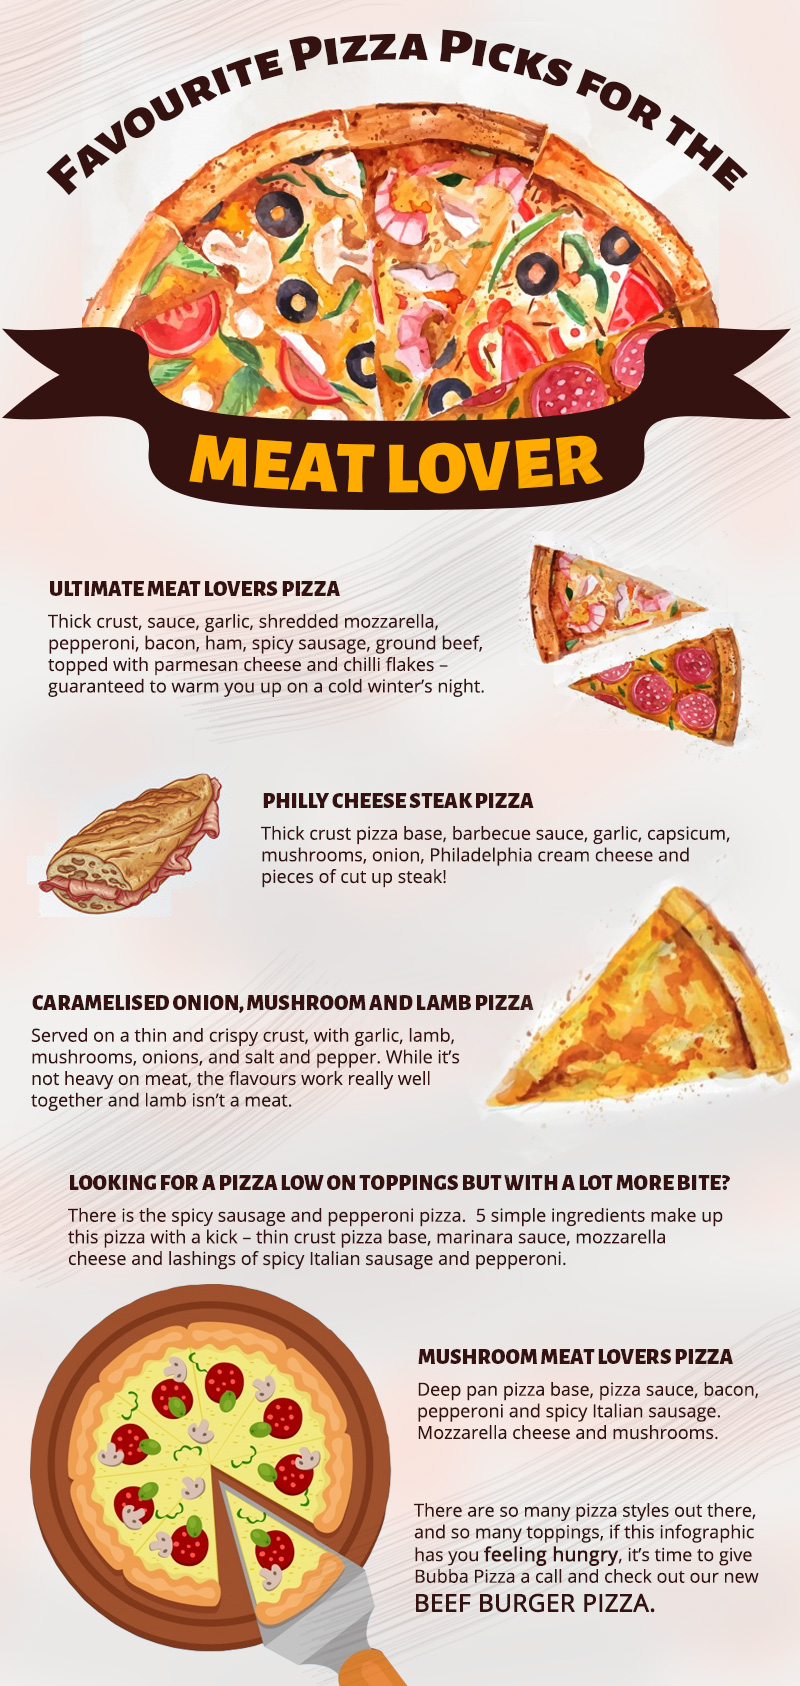 Favourite Pizza Picks for the Meat Lover